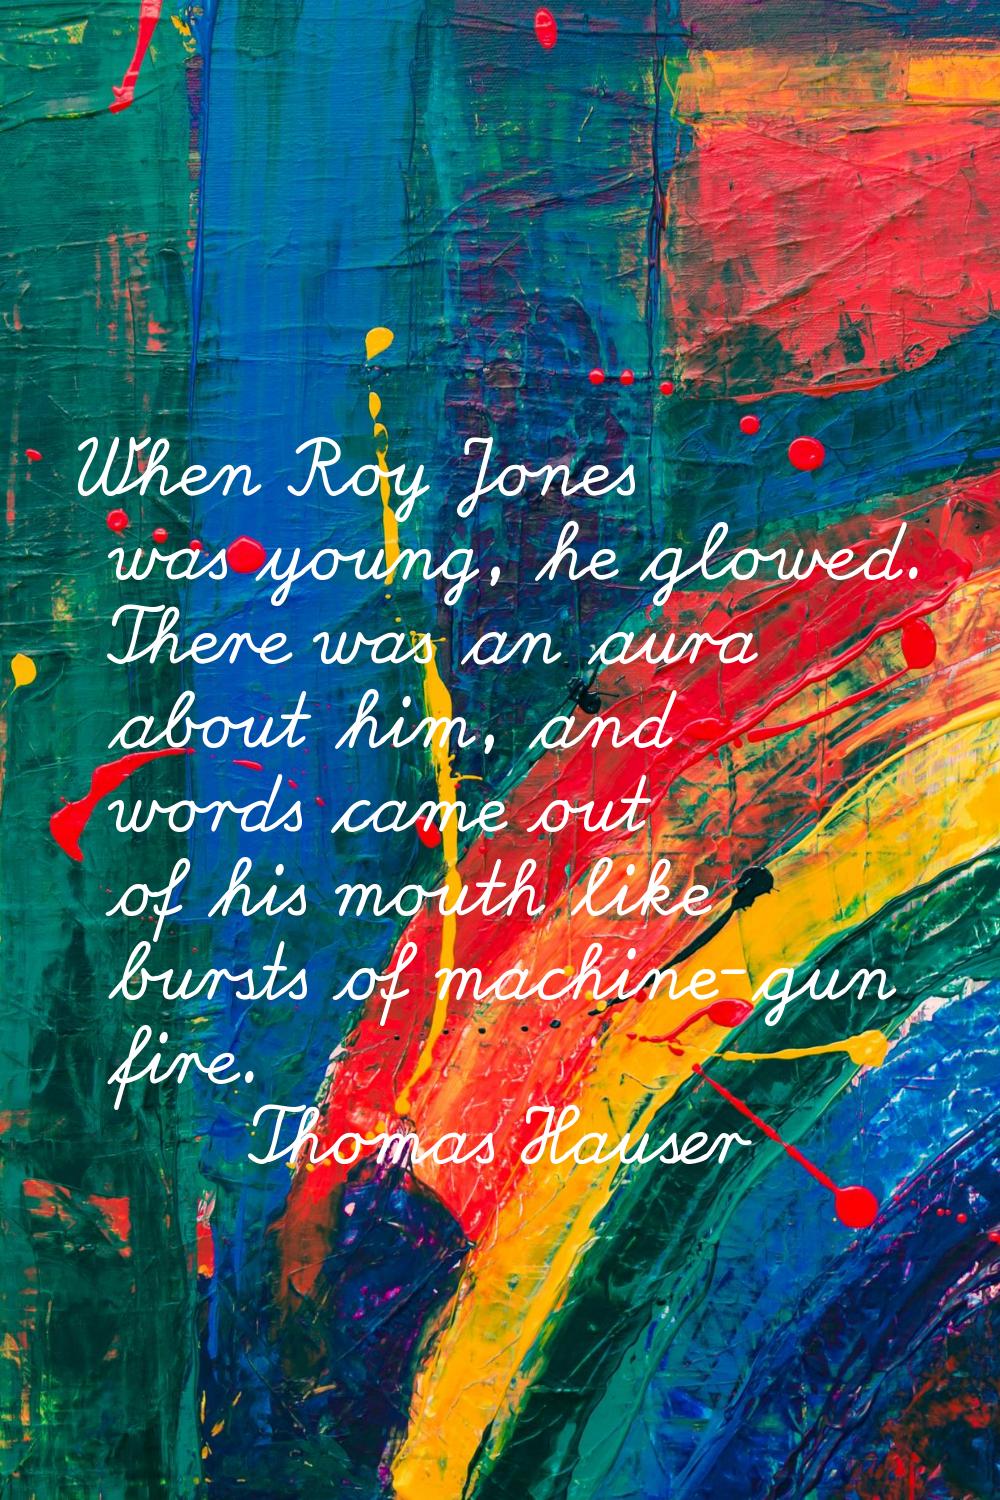 When Roy Jones was young, he glowed. There was an aura about him, and words came out of his mouth l